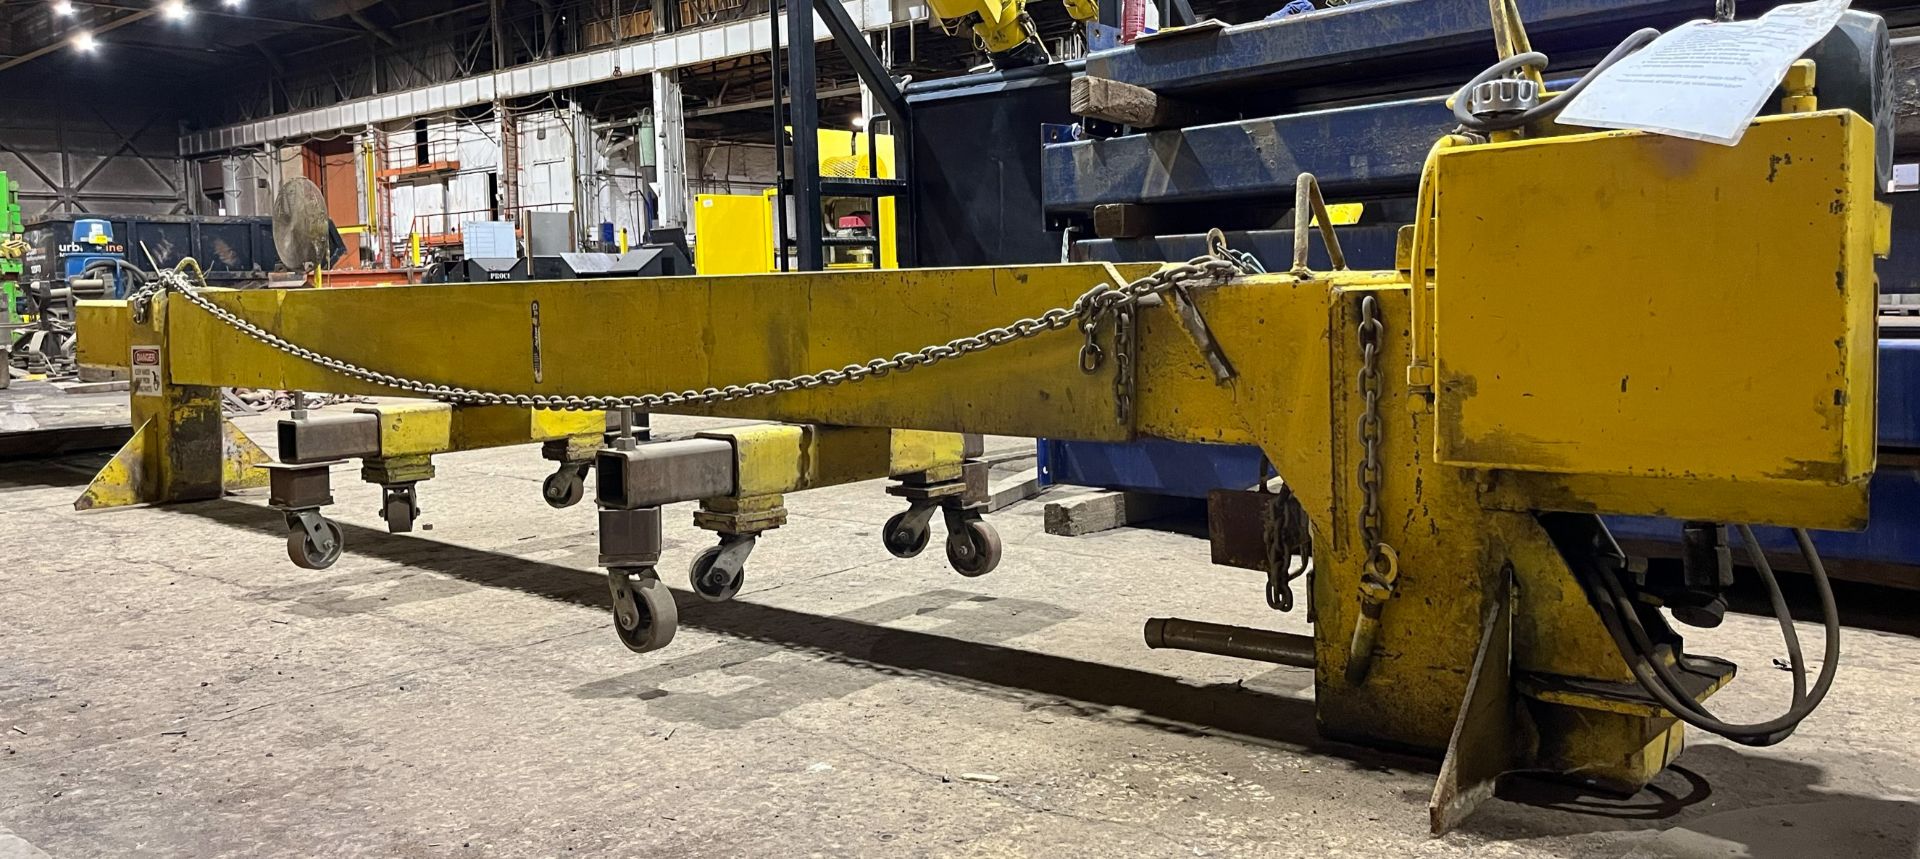 HYDRAULIC GIRDER SQUEEZE JIG [RIGGING FEES FOR LOT #189A - $500 USD PLUS APPLICABLE TAXES] - Image 8 of 11